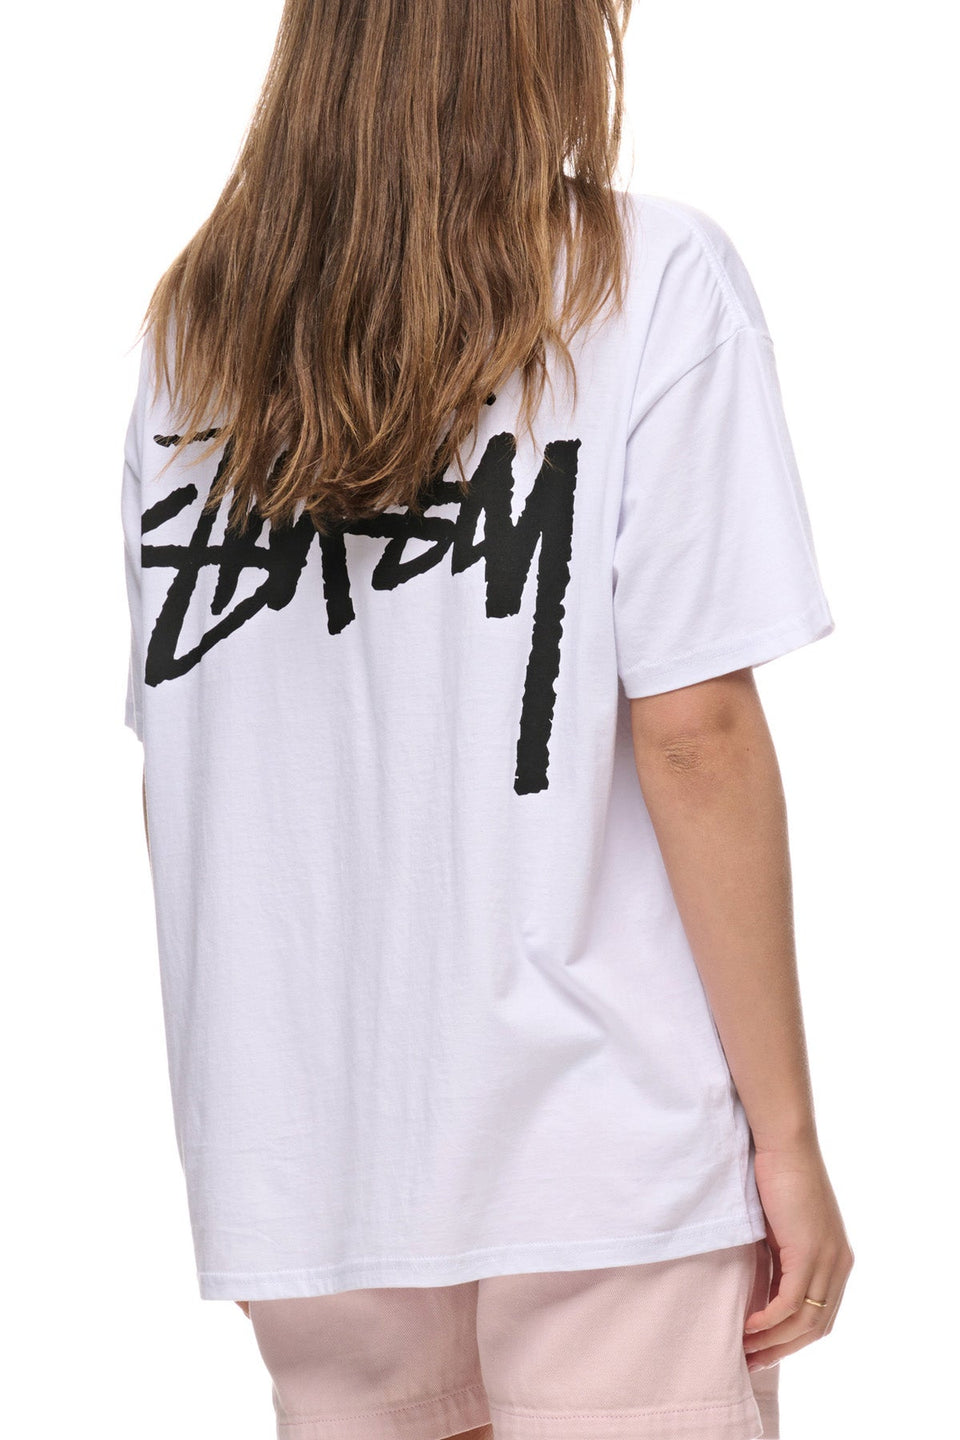 Stussy Bigger Stock Relaxed Tee - White